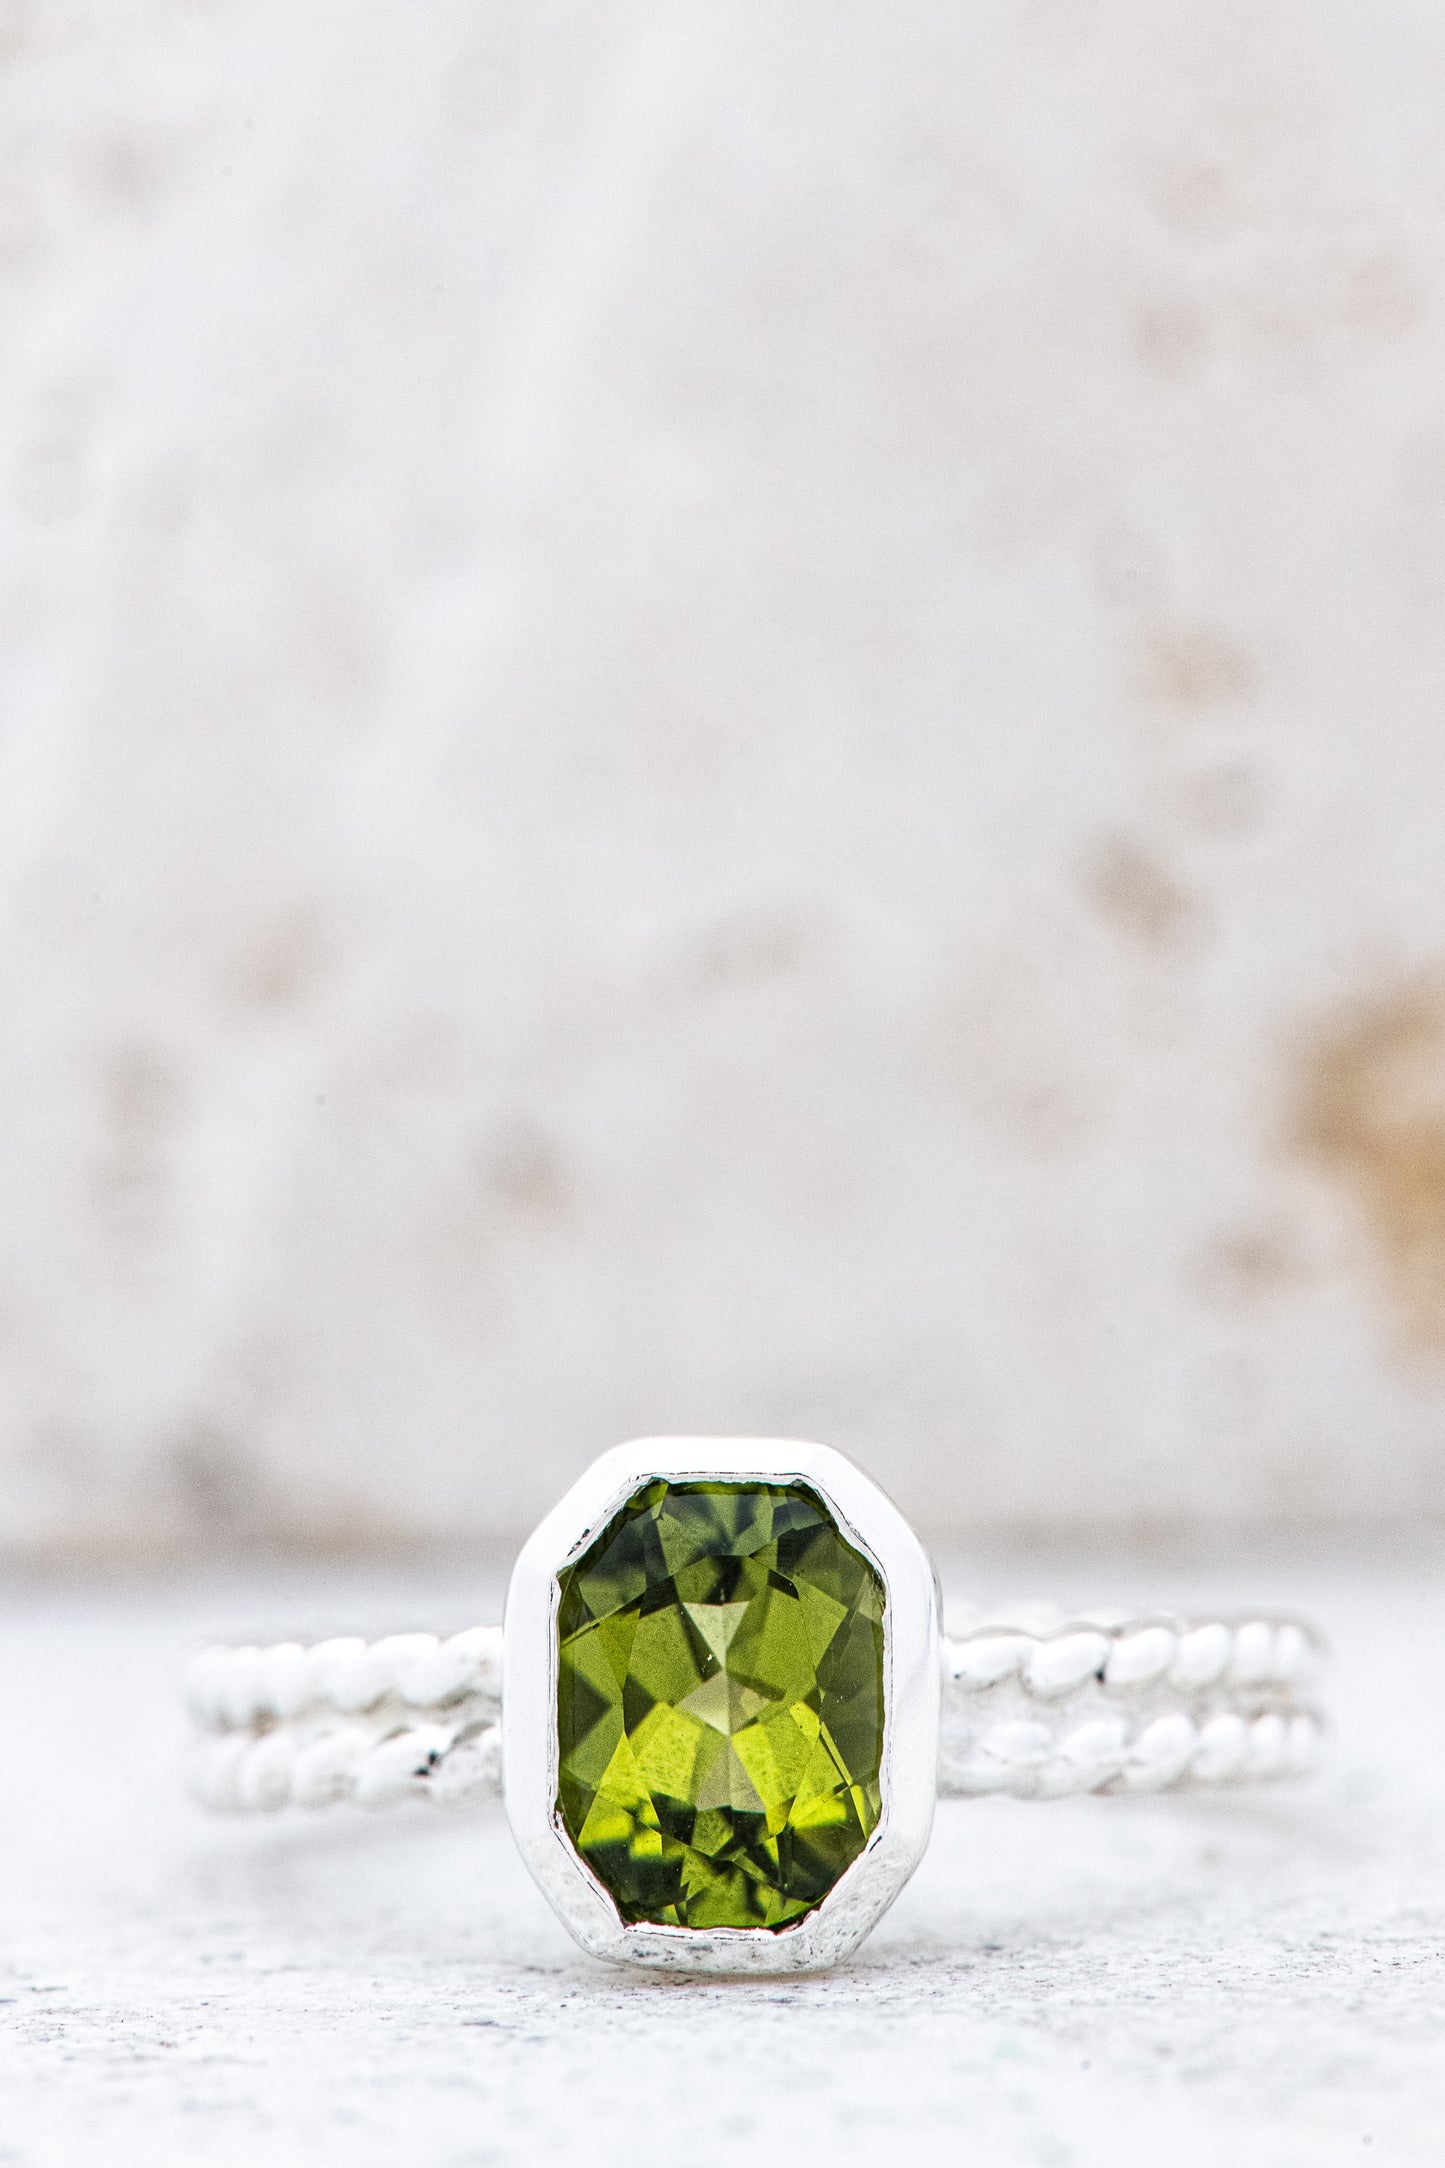 Handmade Peridot Ring Size 7.5 in sterling silver by Cassin Jewelry.